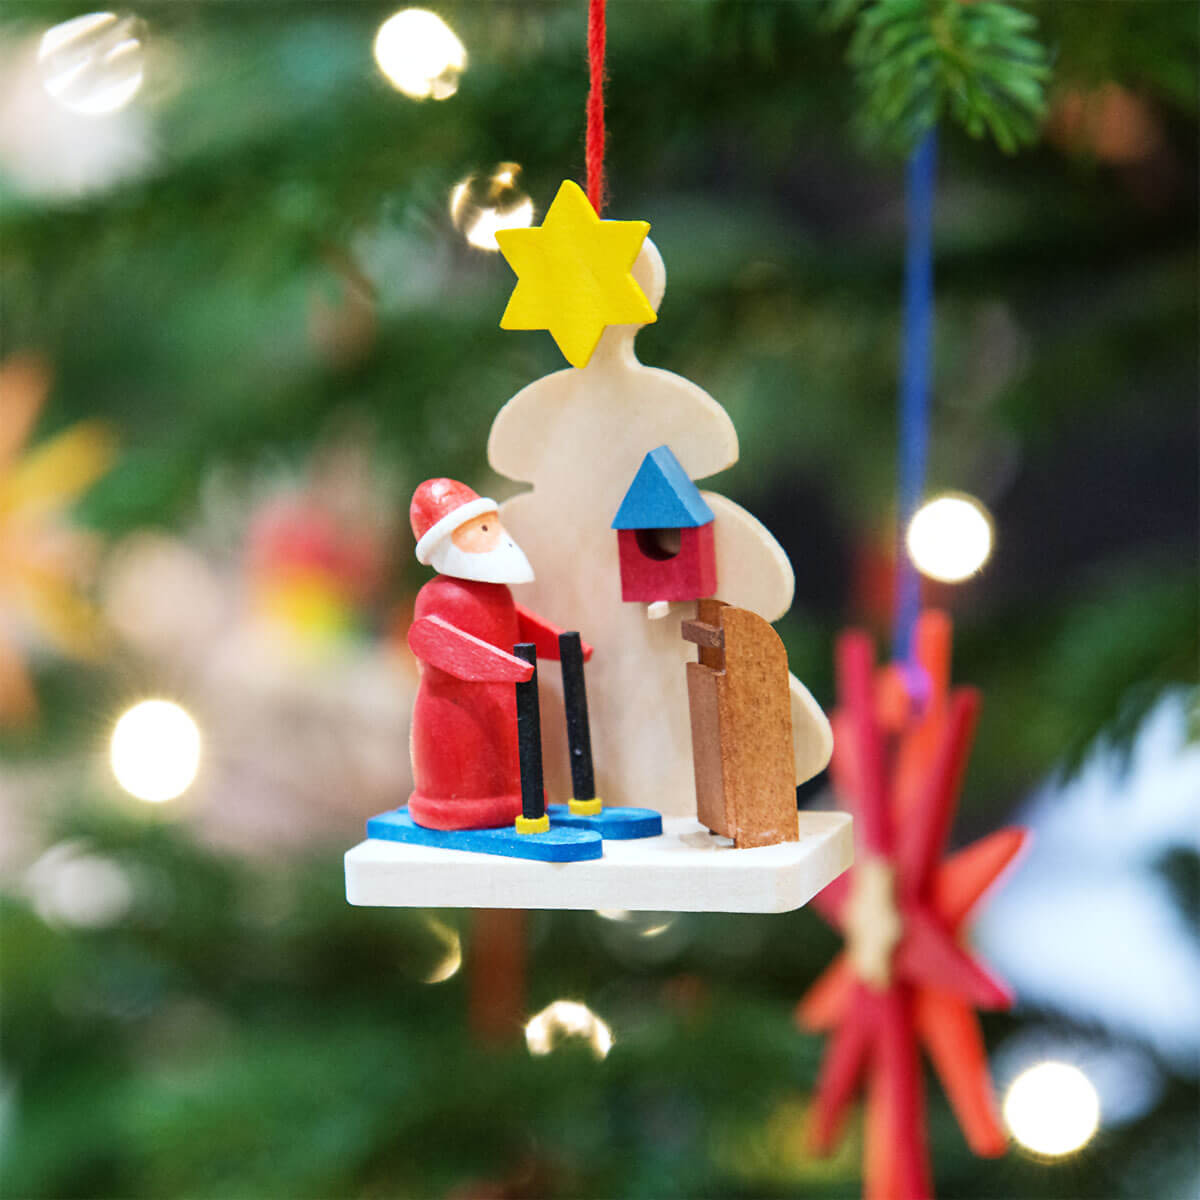 Tree 'Santa Claus' Ornament with snowshoes